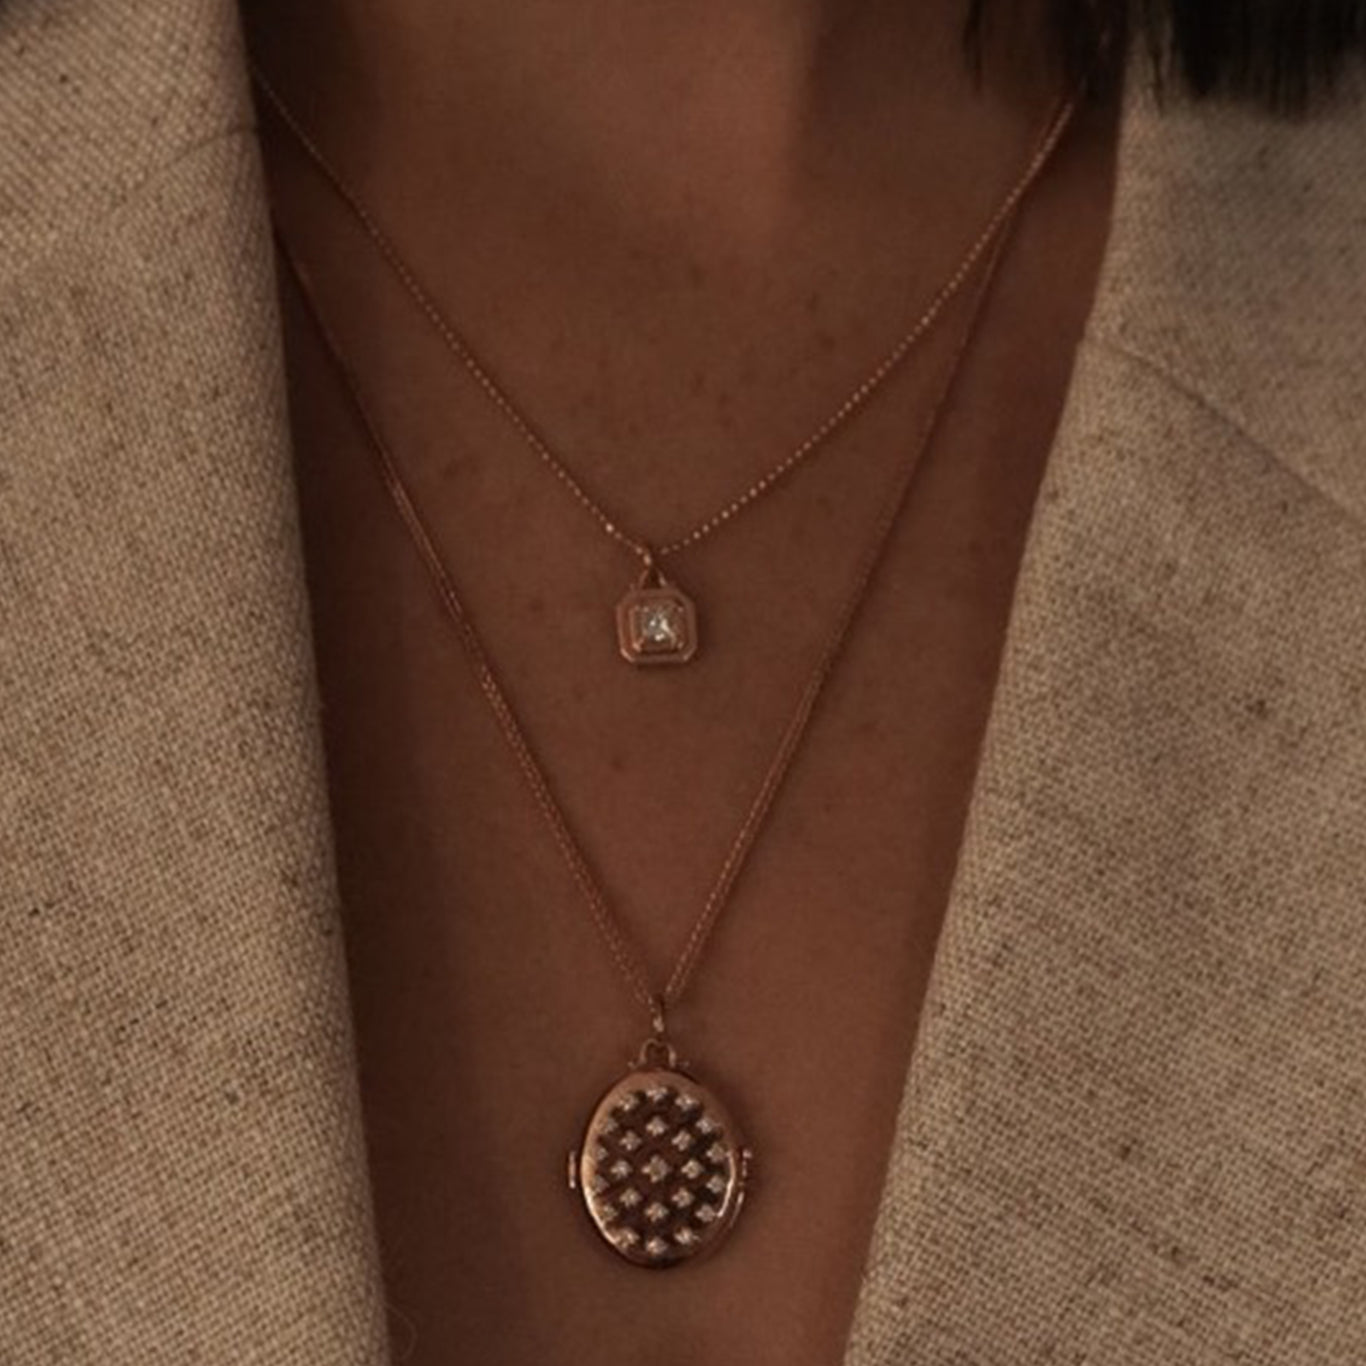 Comet Necklace shown with the Etoile Locket